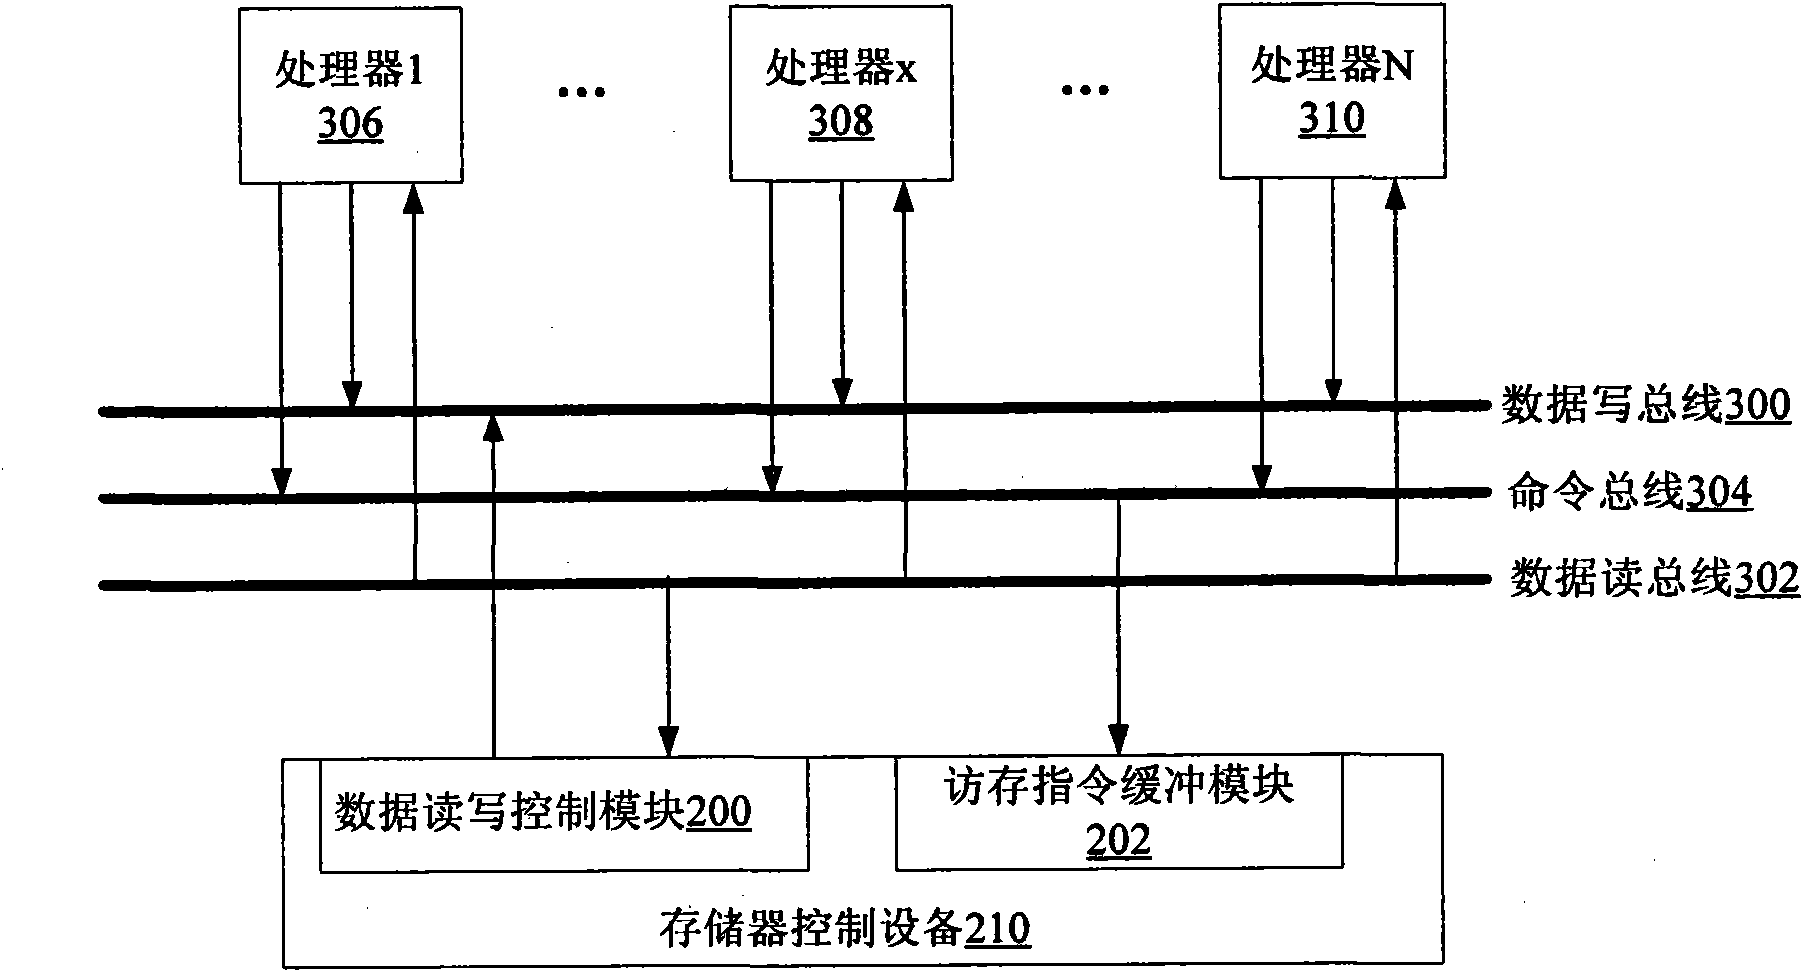 Instruction prefetch-based multi-core shared memory control equipment